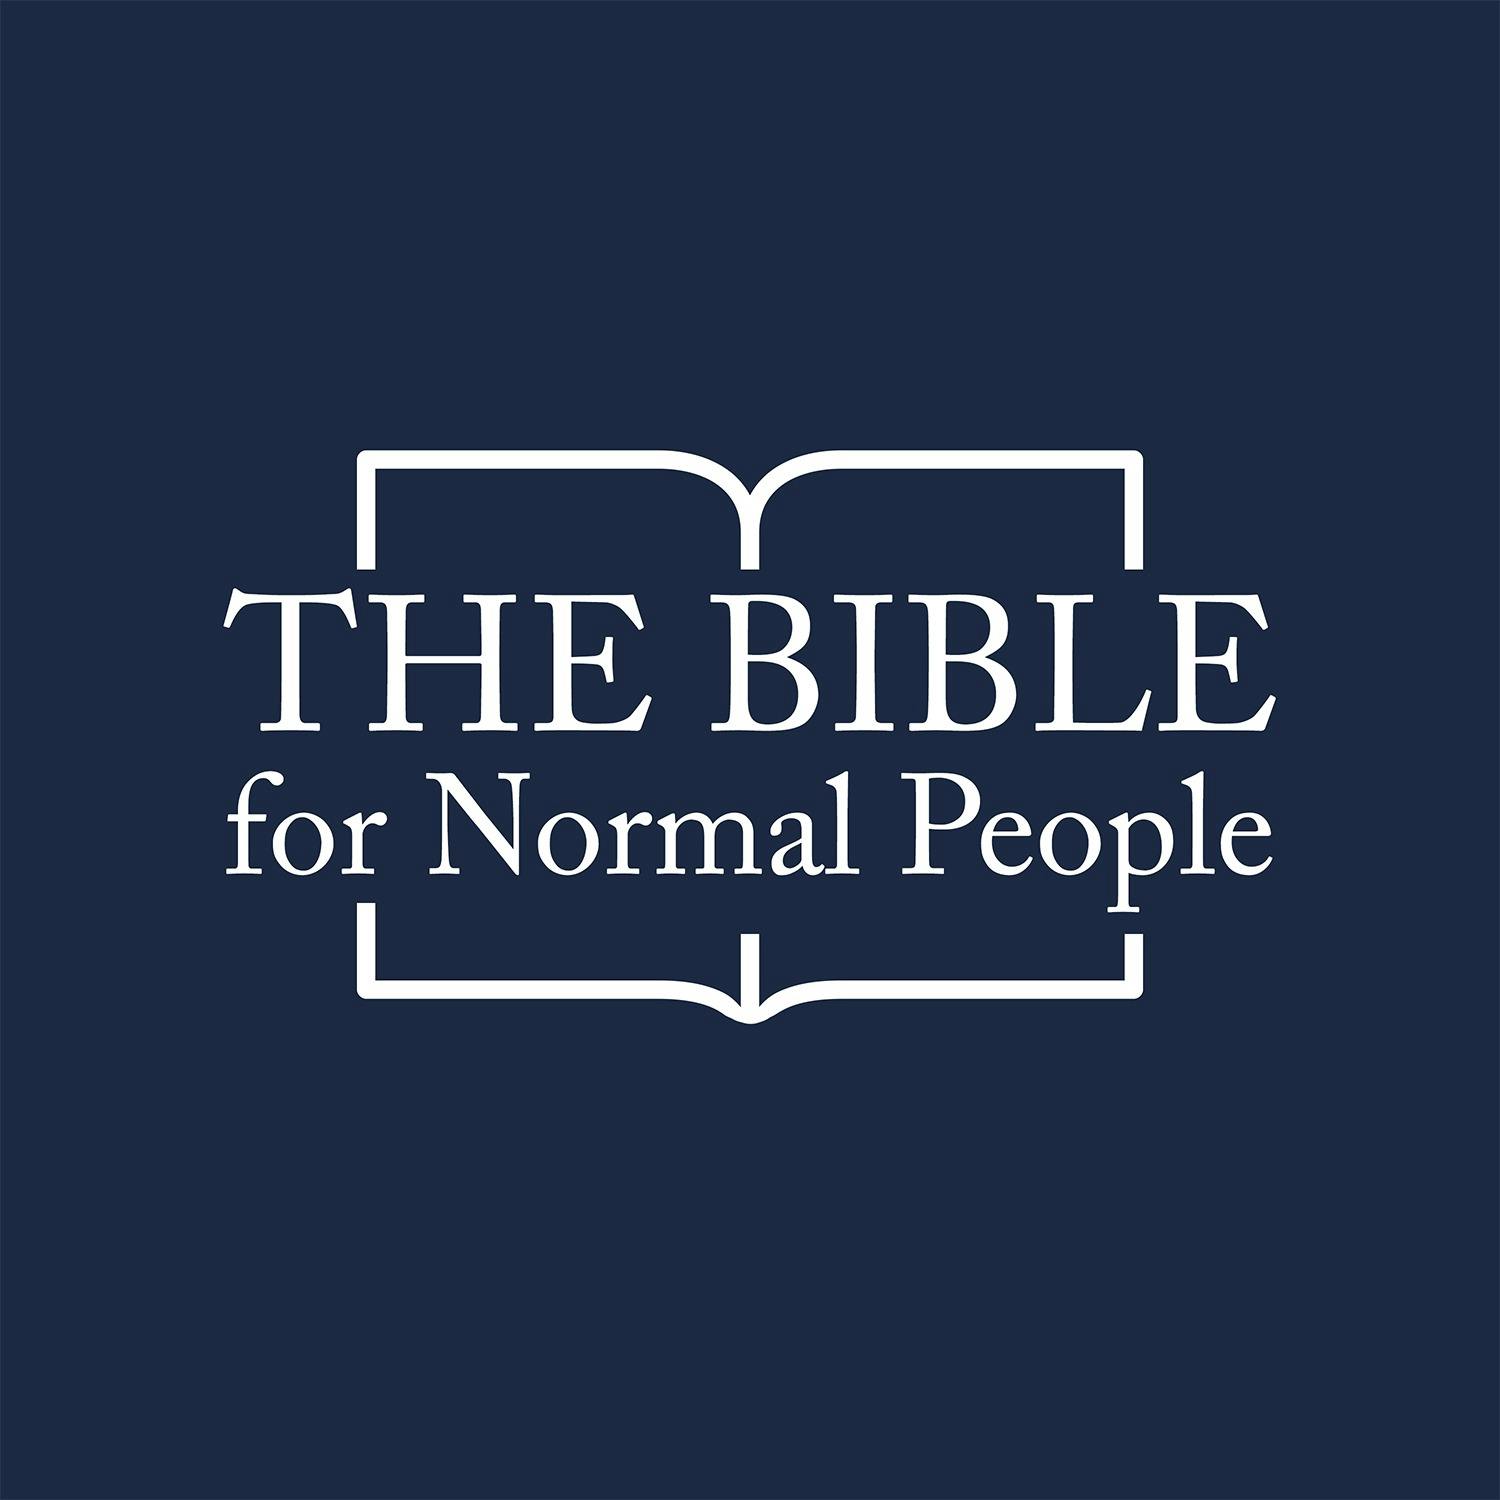 Episode 63: Pete Enns - What Does the Bible Have to Say about Politics—American or Otherwise?